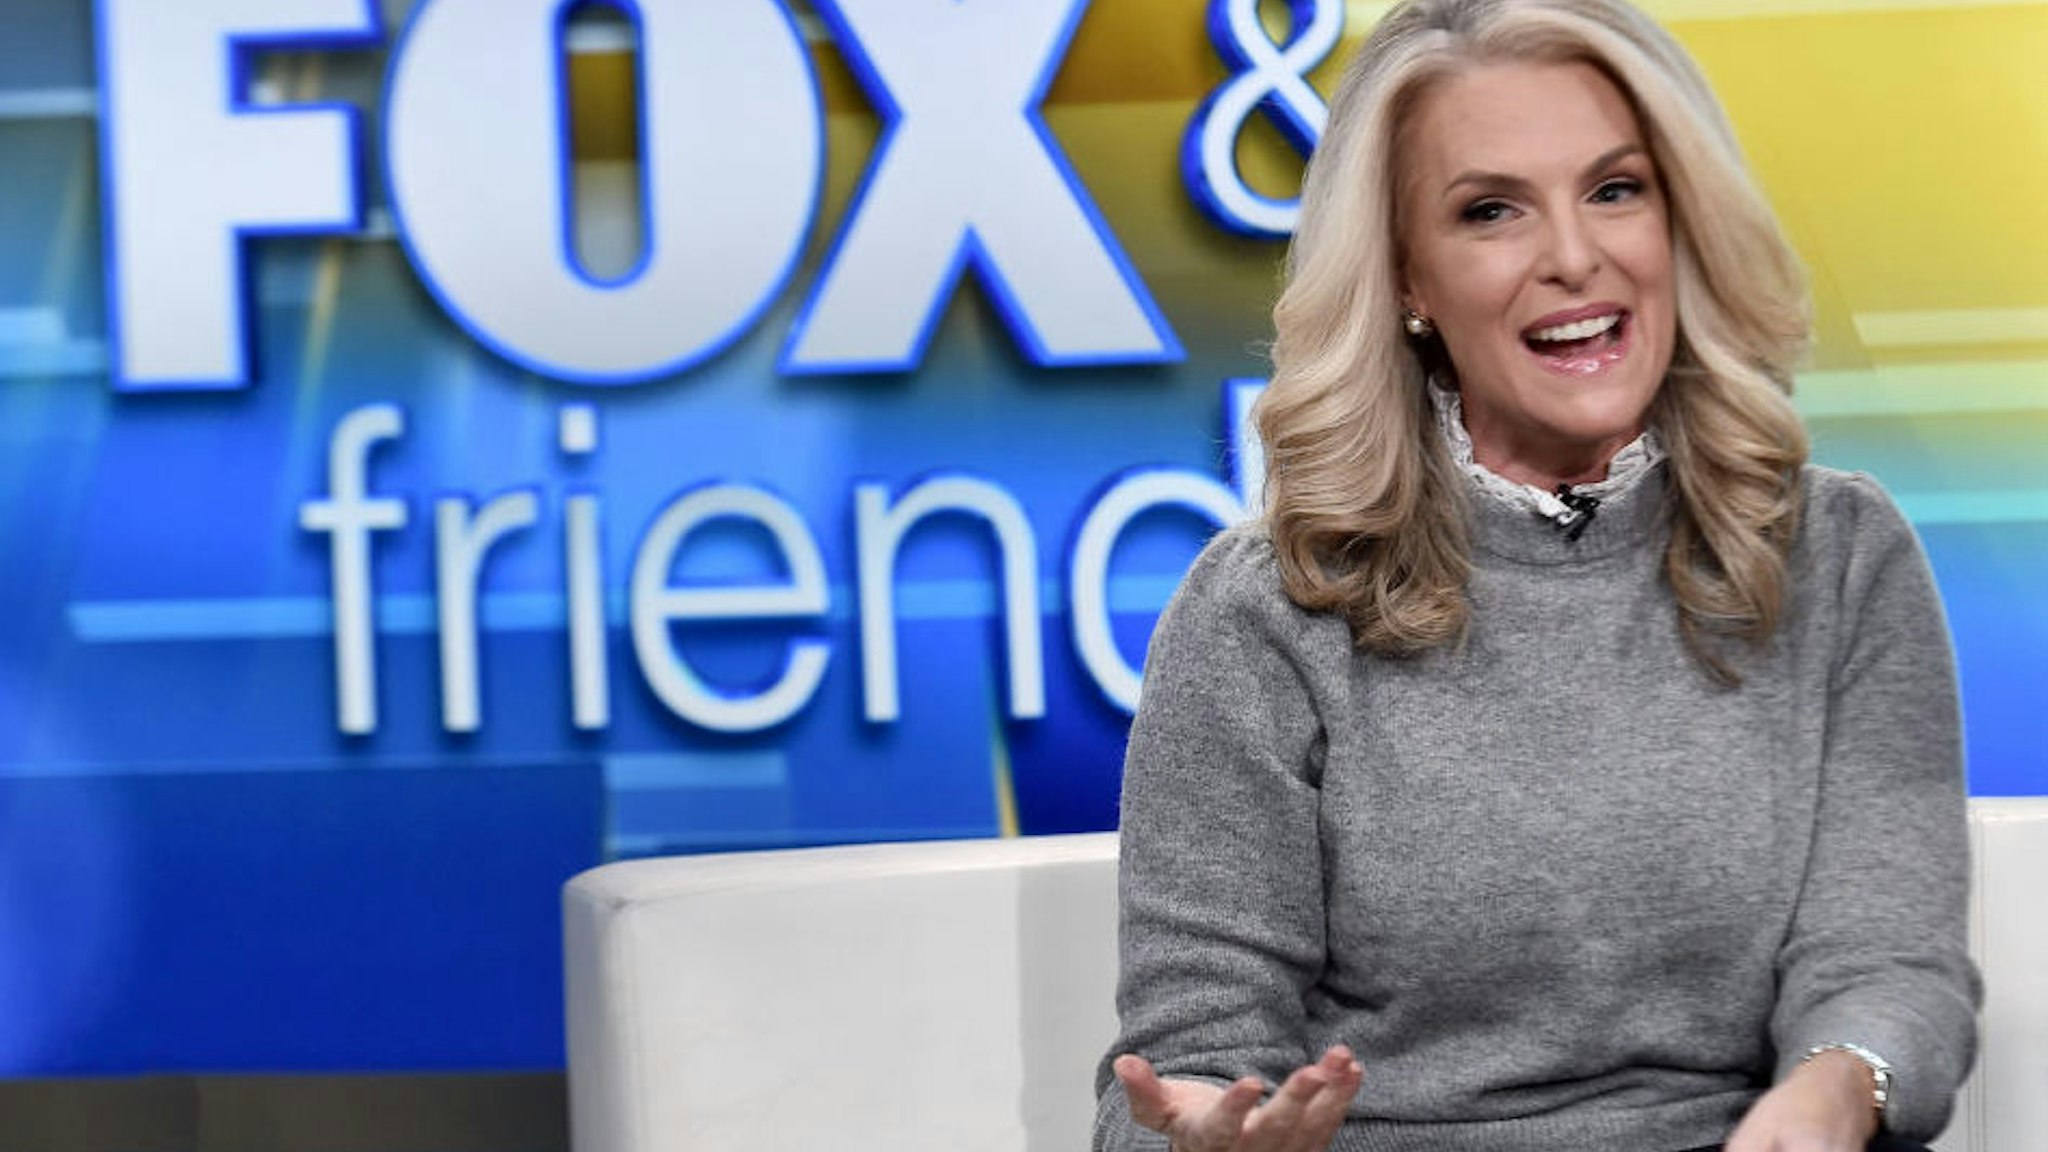 Janice Dean presents on "Fox & Friends" at Fox News Channel Studios on November 04, 2019 in New York City.